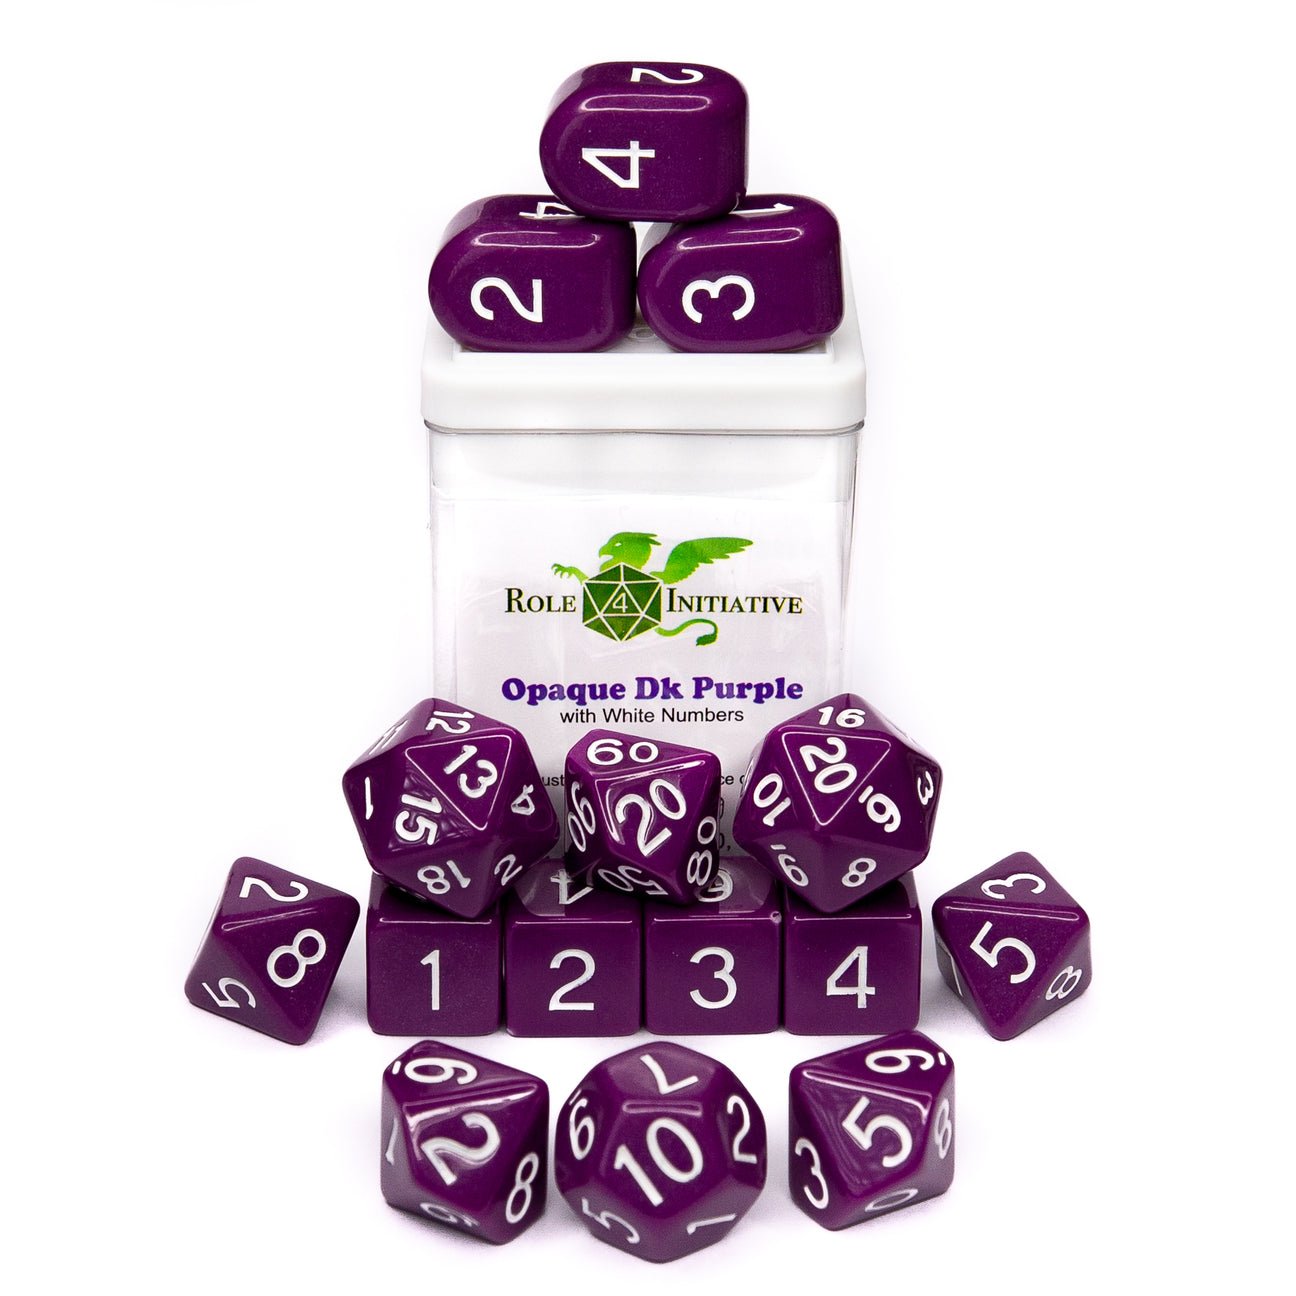 Opaque Dark Purple - 15 dice set (with Arch’d4™) - The Fourth Place